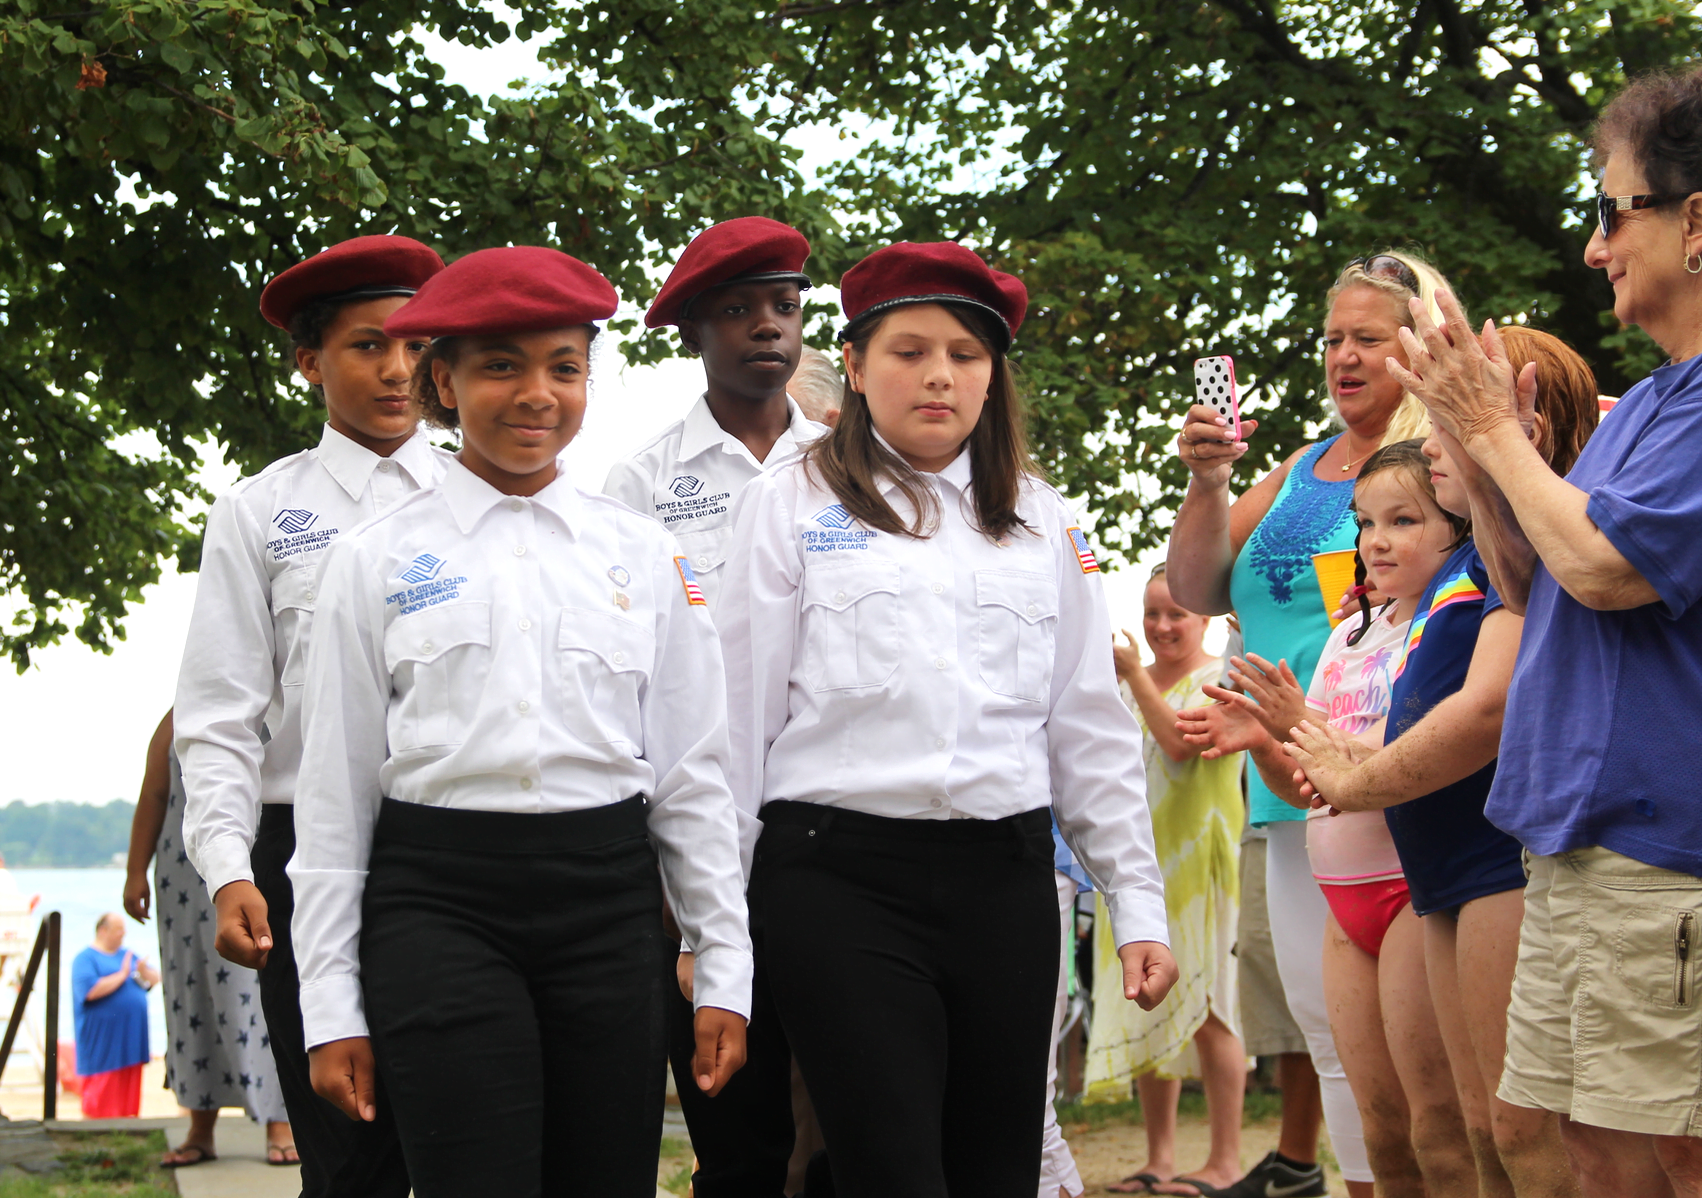 The Boys and Girls Club of Greenwich's honor guard participated in the 100th anniversary of Island Beach. Aug 25, 2018 Photo: Leslie Yager